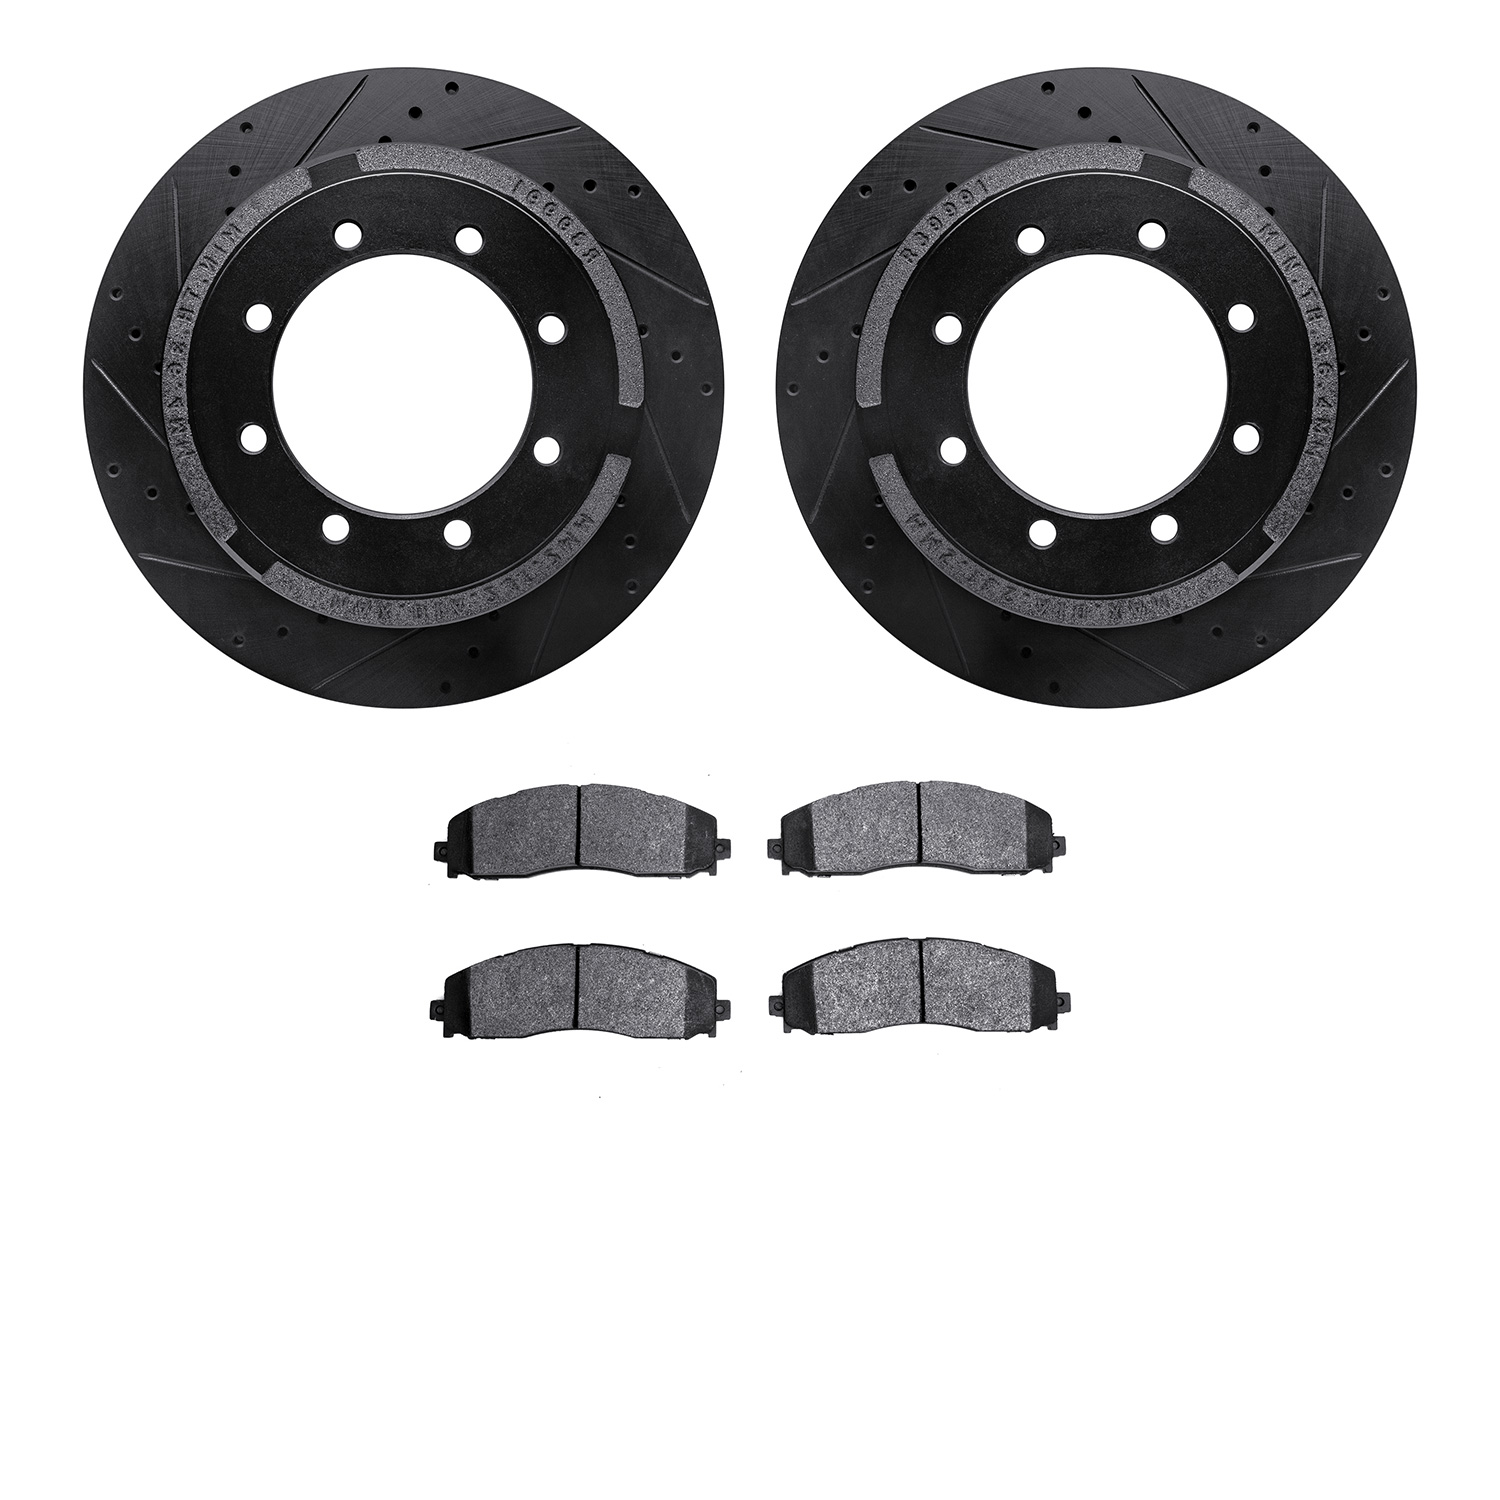 8402-54099 Drilled/Slotted Brake Rotors with Ultimate-Duty Brake Pads Kit [Black], Fits Select Ford/Lincoln/Mercury/Mazda, Posit